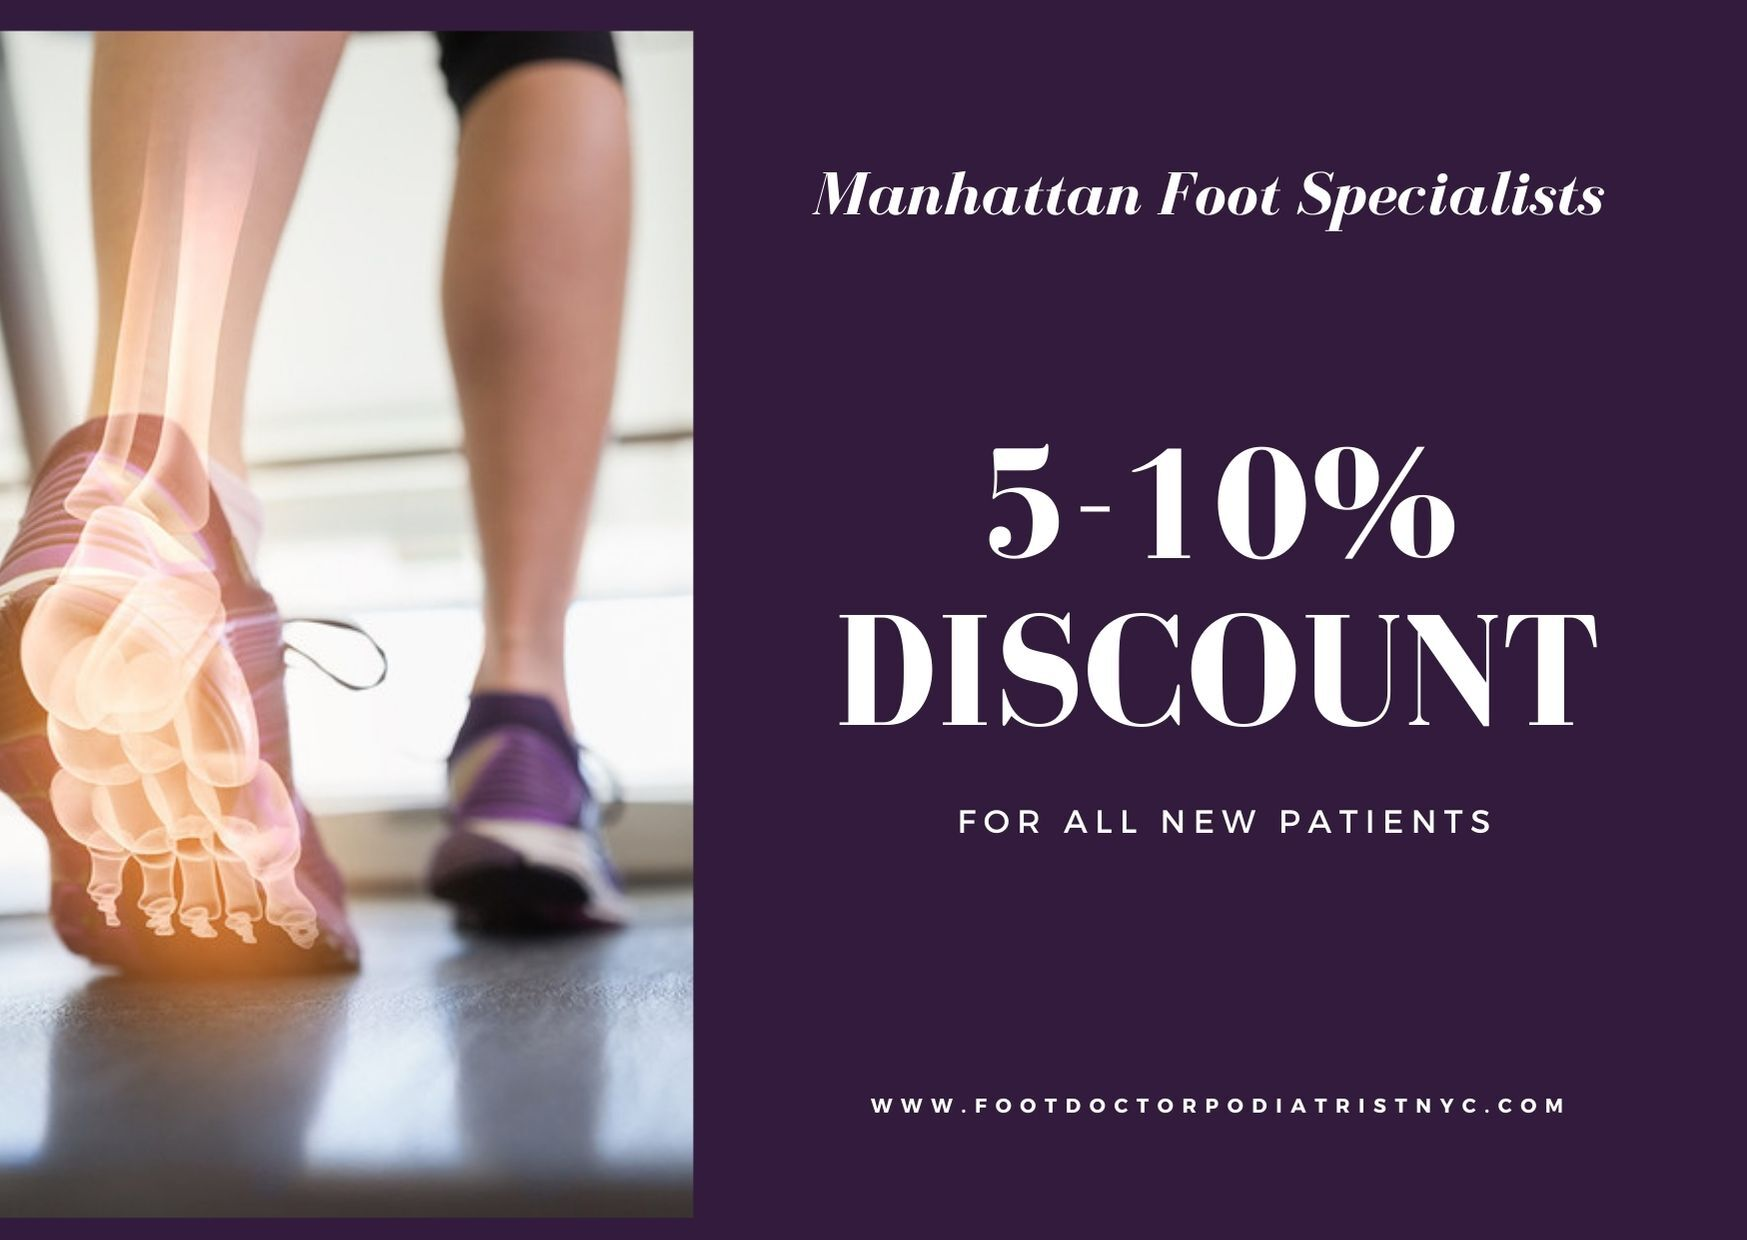 Manhattan Foot Specialists offers a discount'